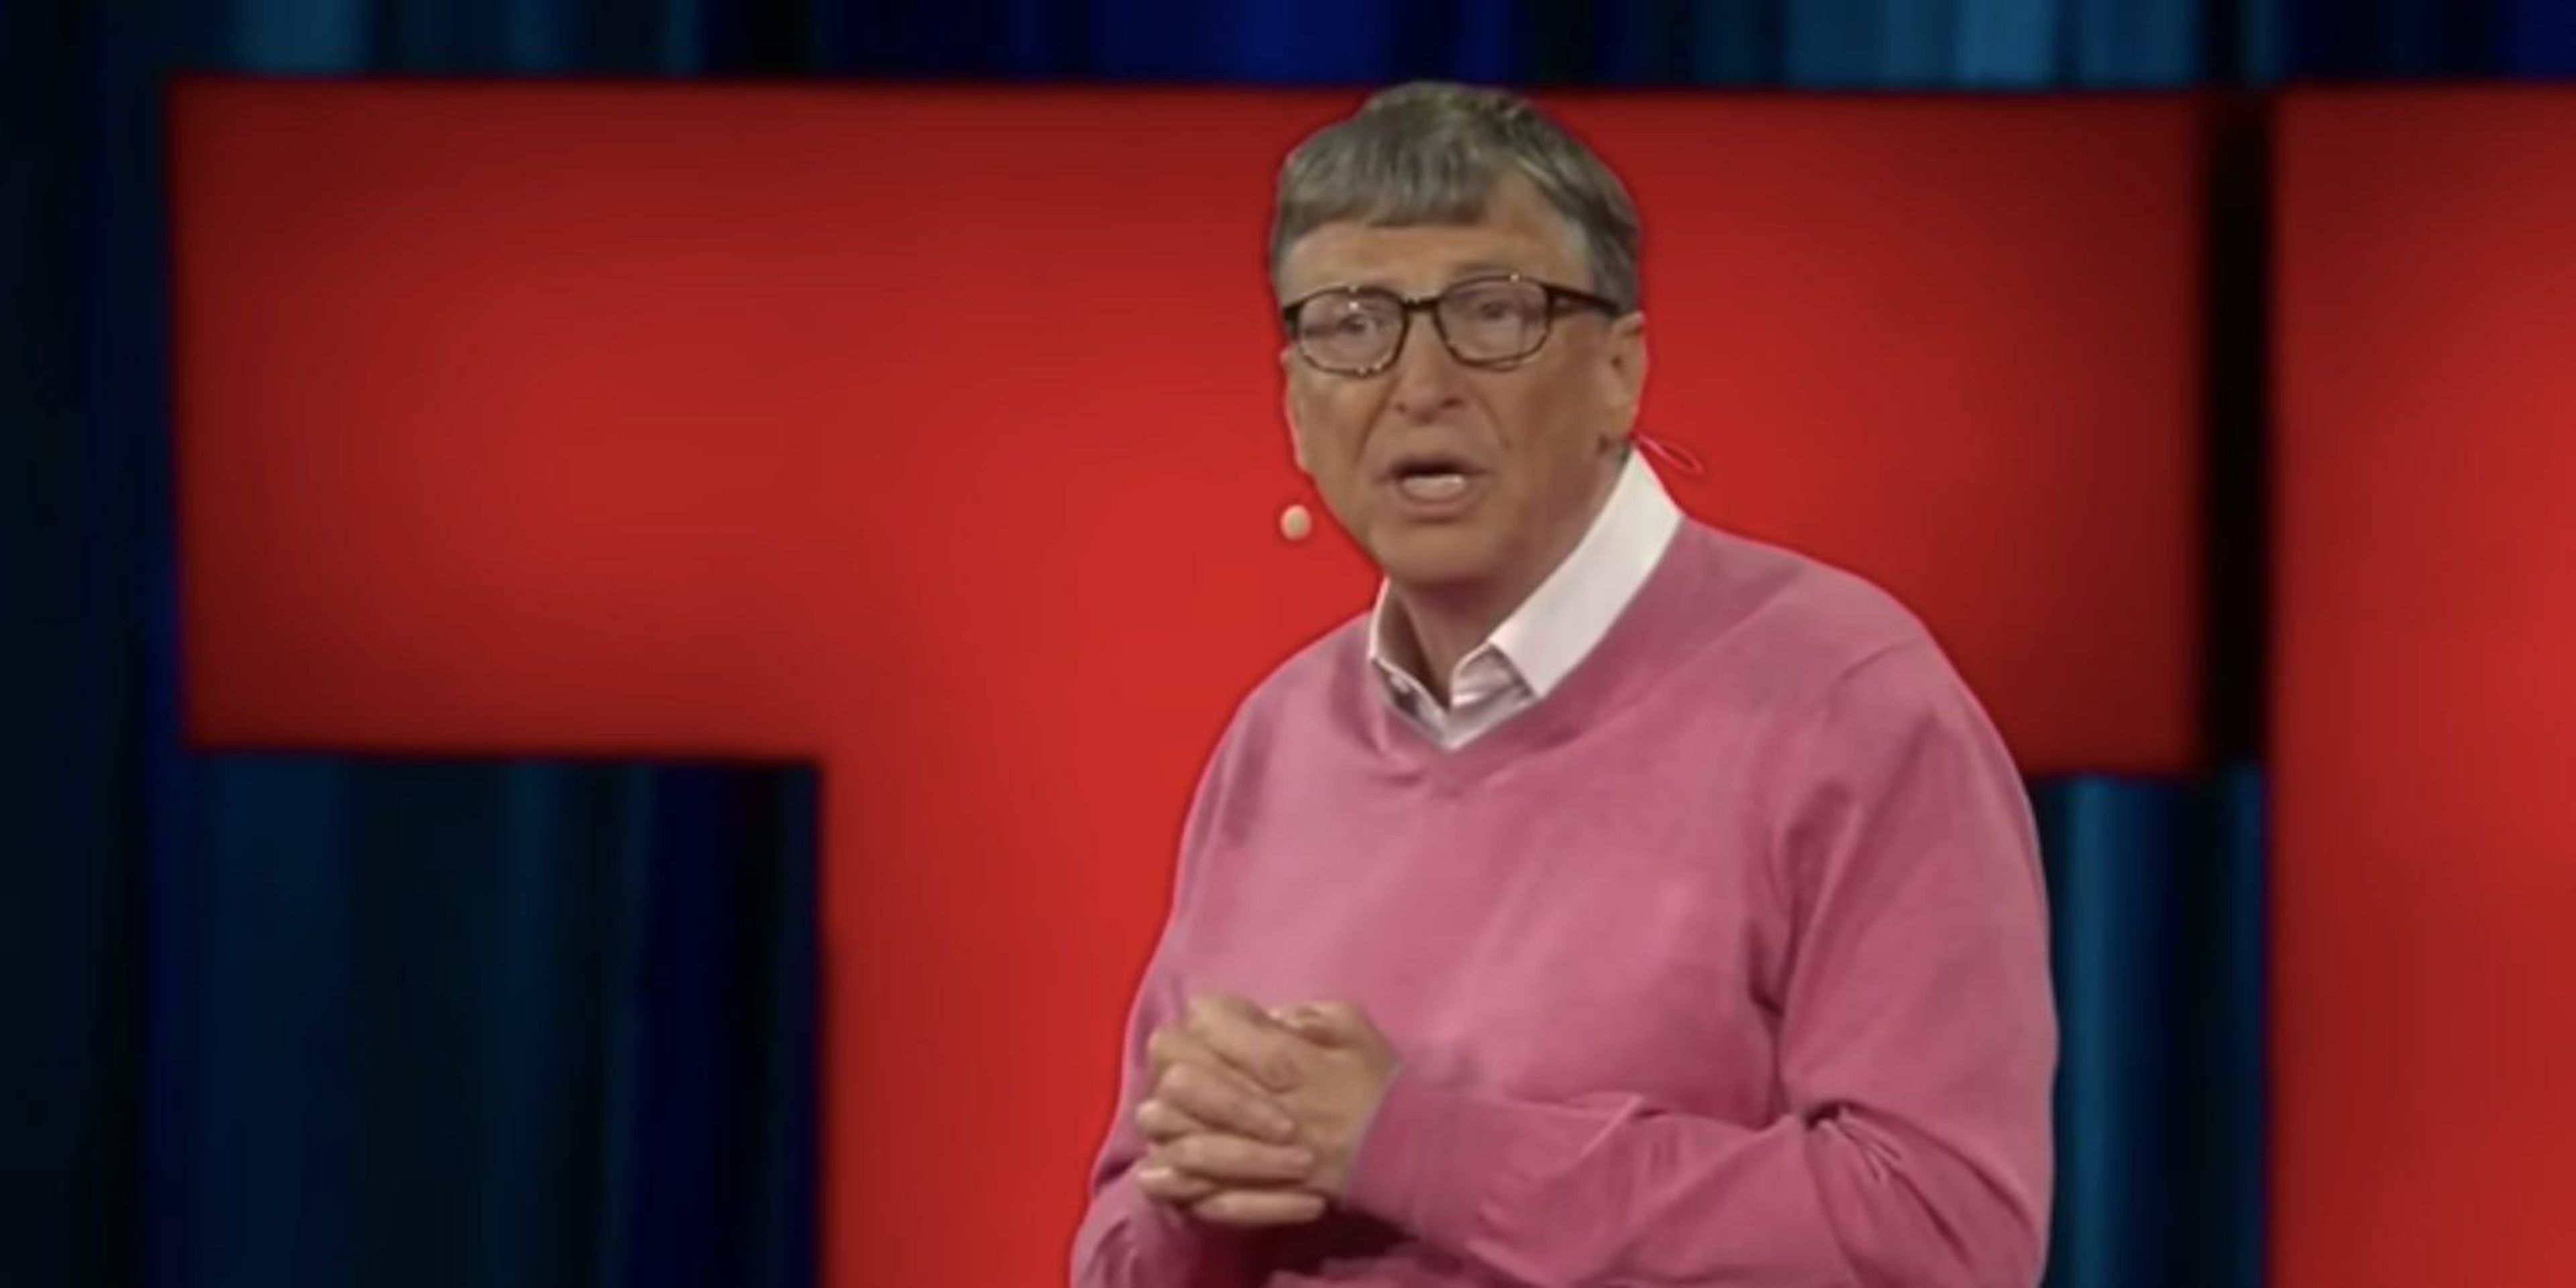 Bill Gates during his 2015 TED Talk "The next outbreak? We’re not ready."